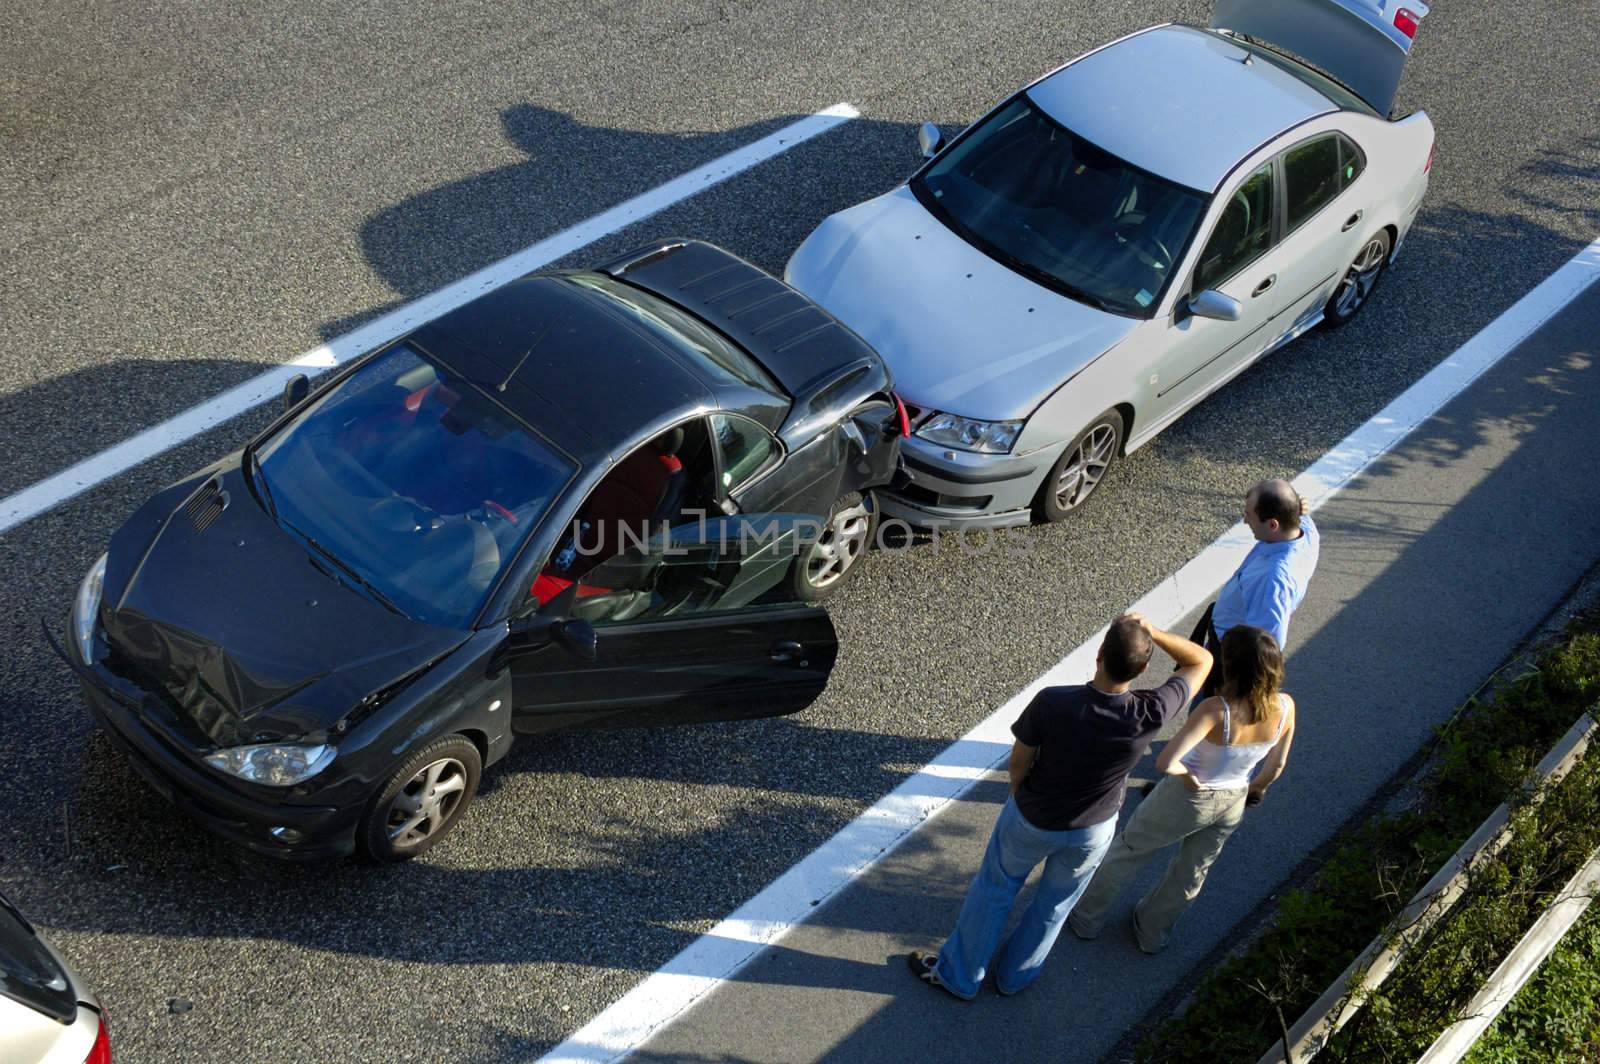 Three people stand by the roadside, discussing what has happened after a small shunt on the freeway (motorway, autoroute, autobahn).